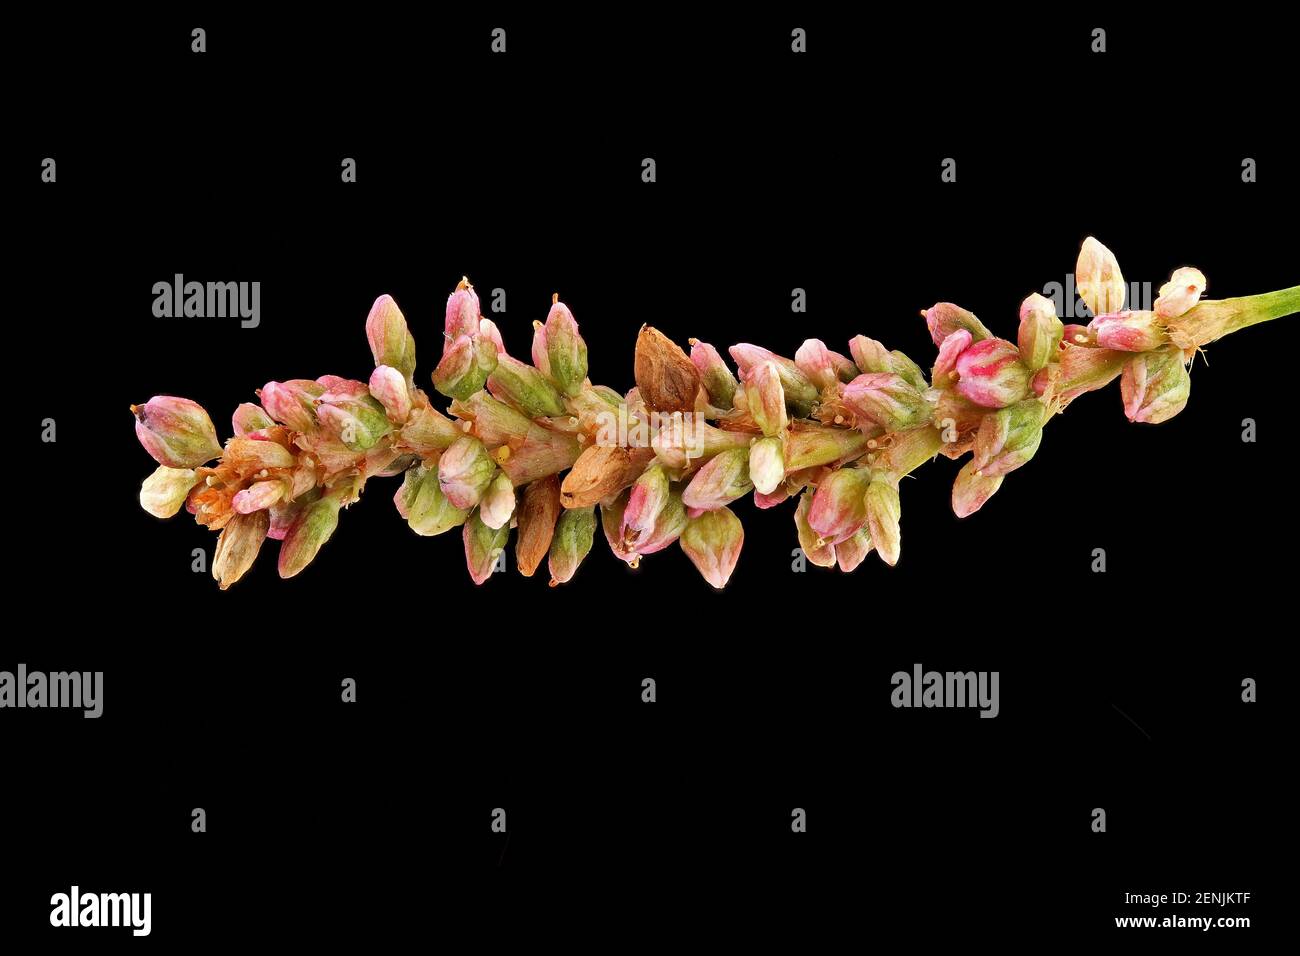 Polygonum persicaria, Lady’s thumb, Pfirsichblättriger Knöterich, close up, flowers and fruits (seeds) enclosed by persistent perianth Stock Photo